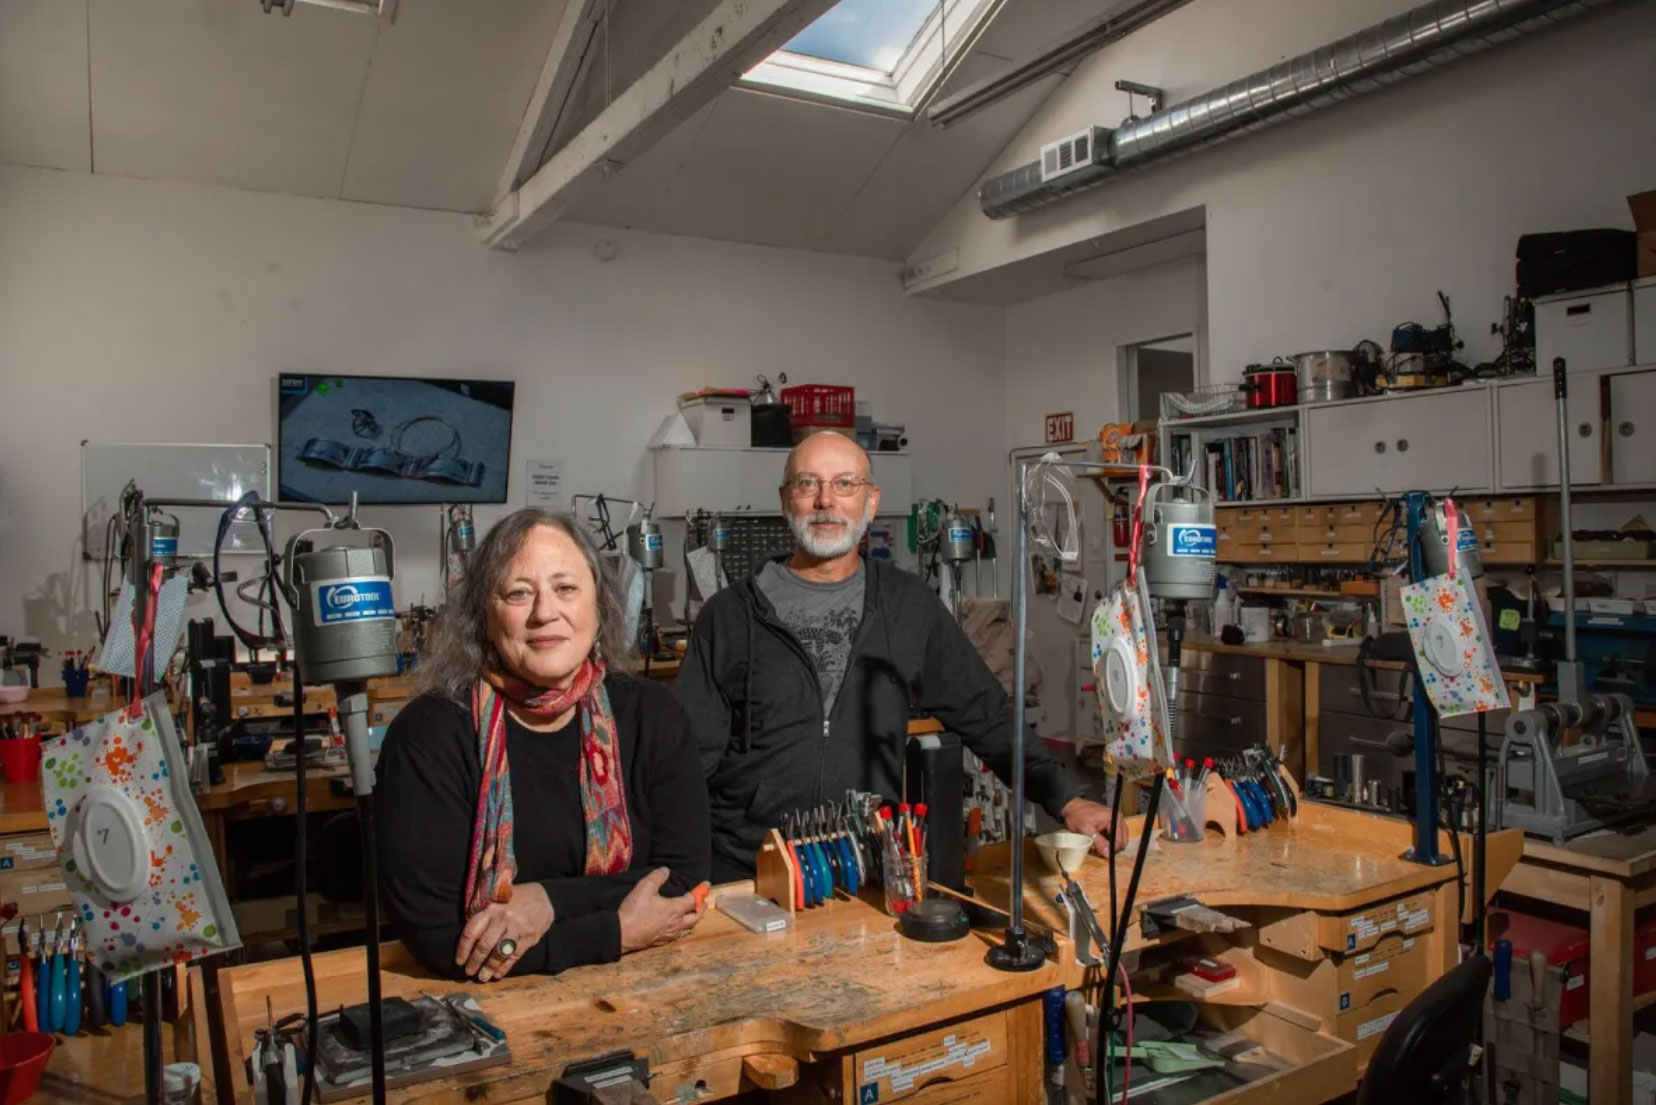 Couple stand behind worktable in well-lit workshop, facing camera